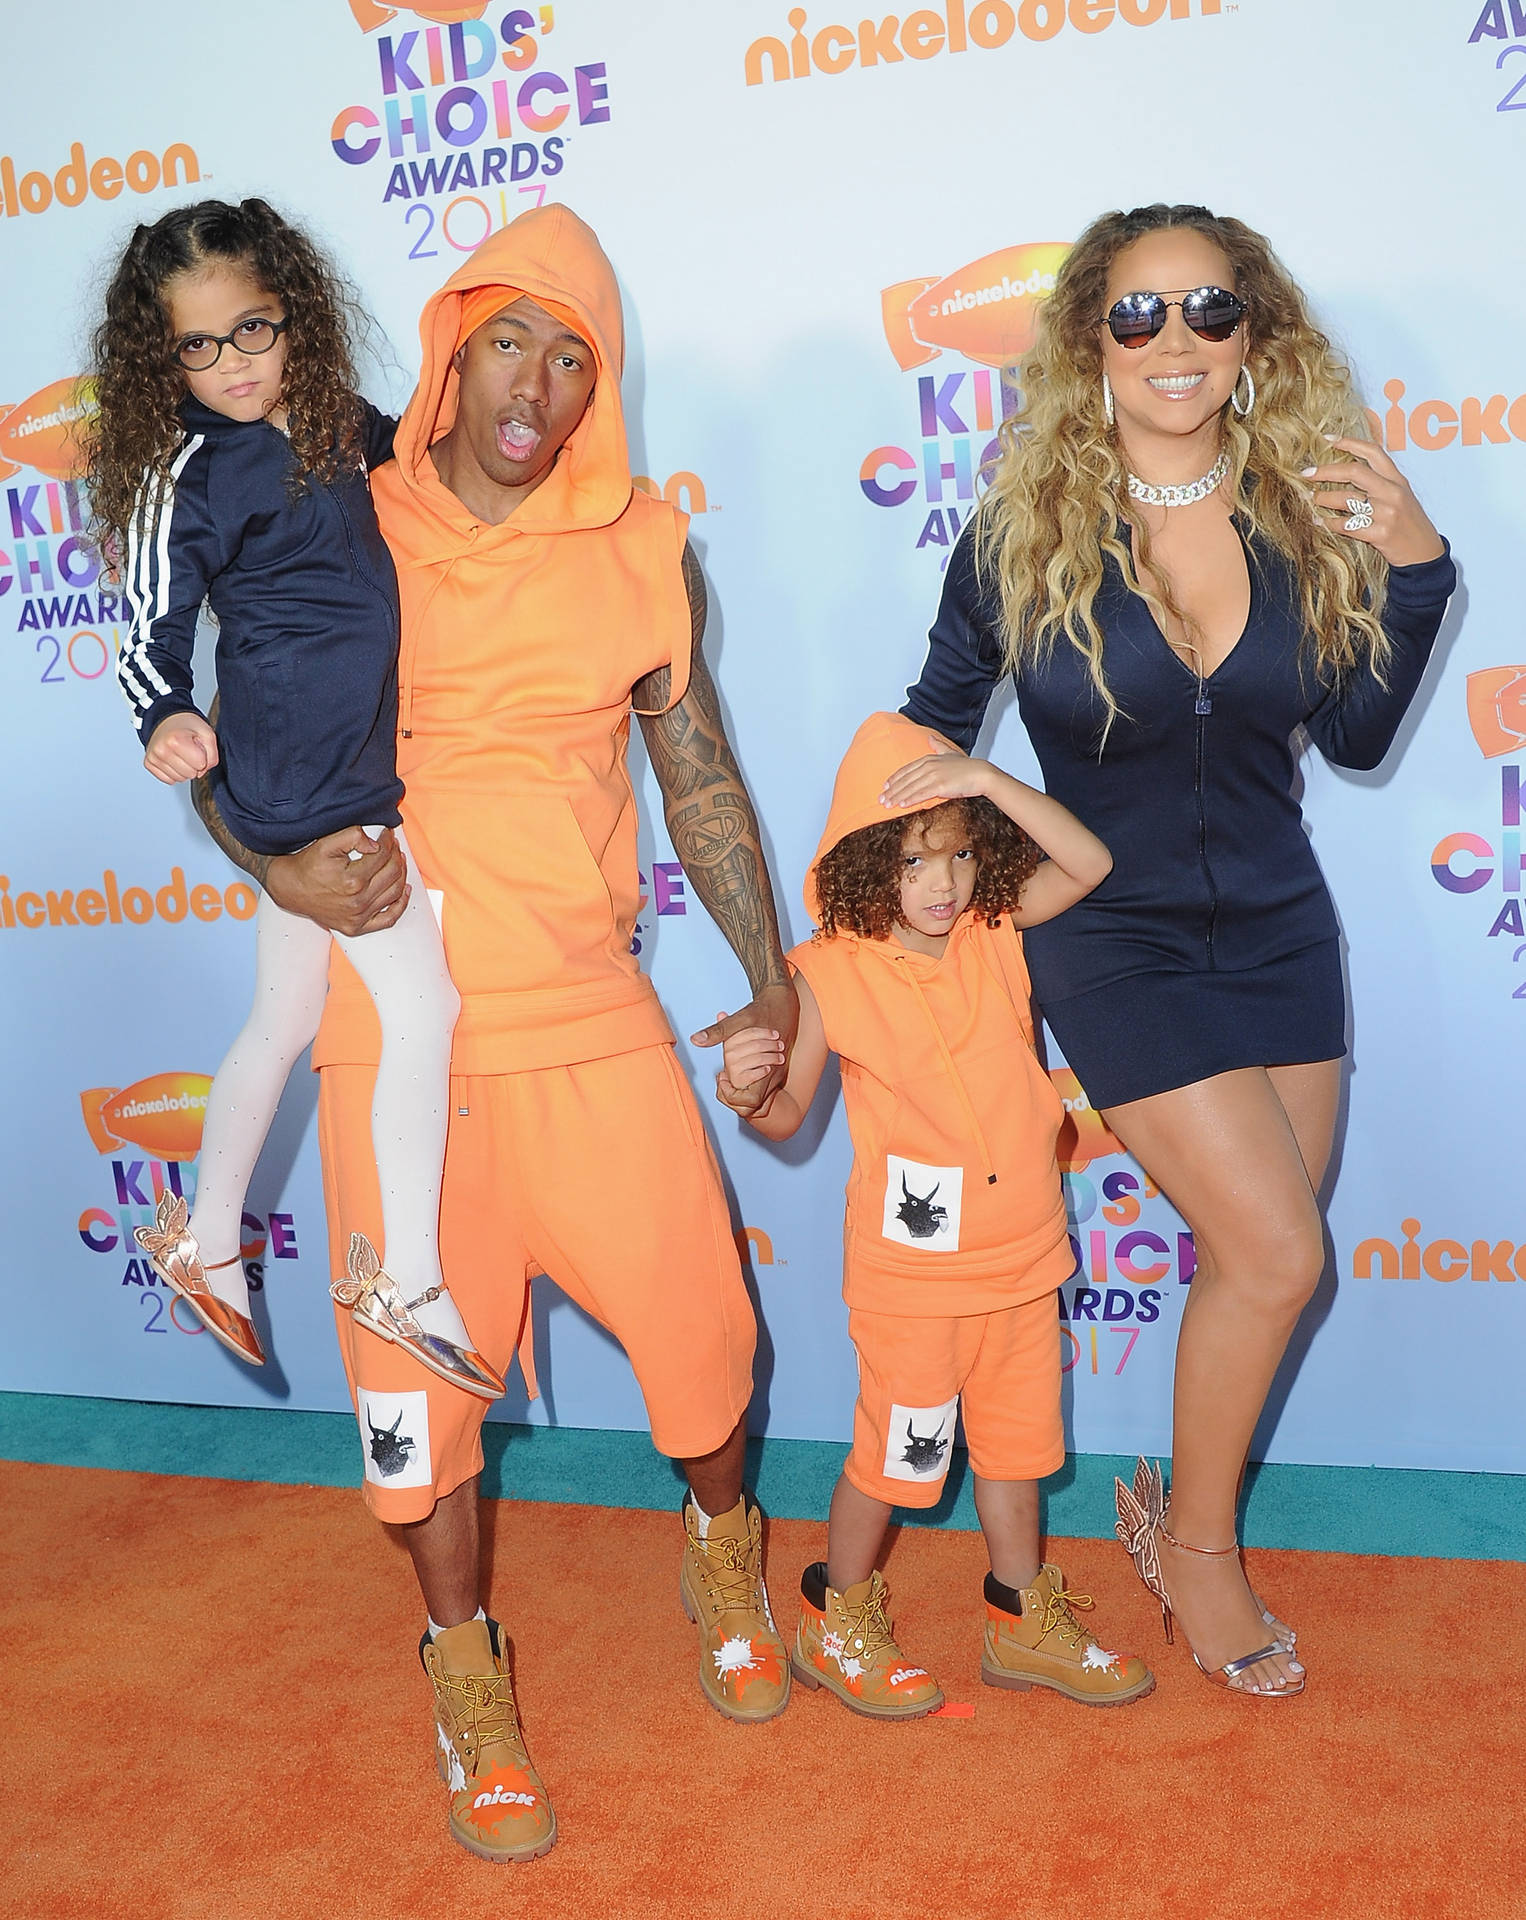 Nick Cannon During Nickelodeon Awards